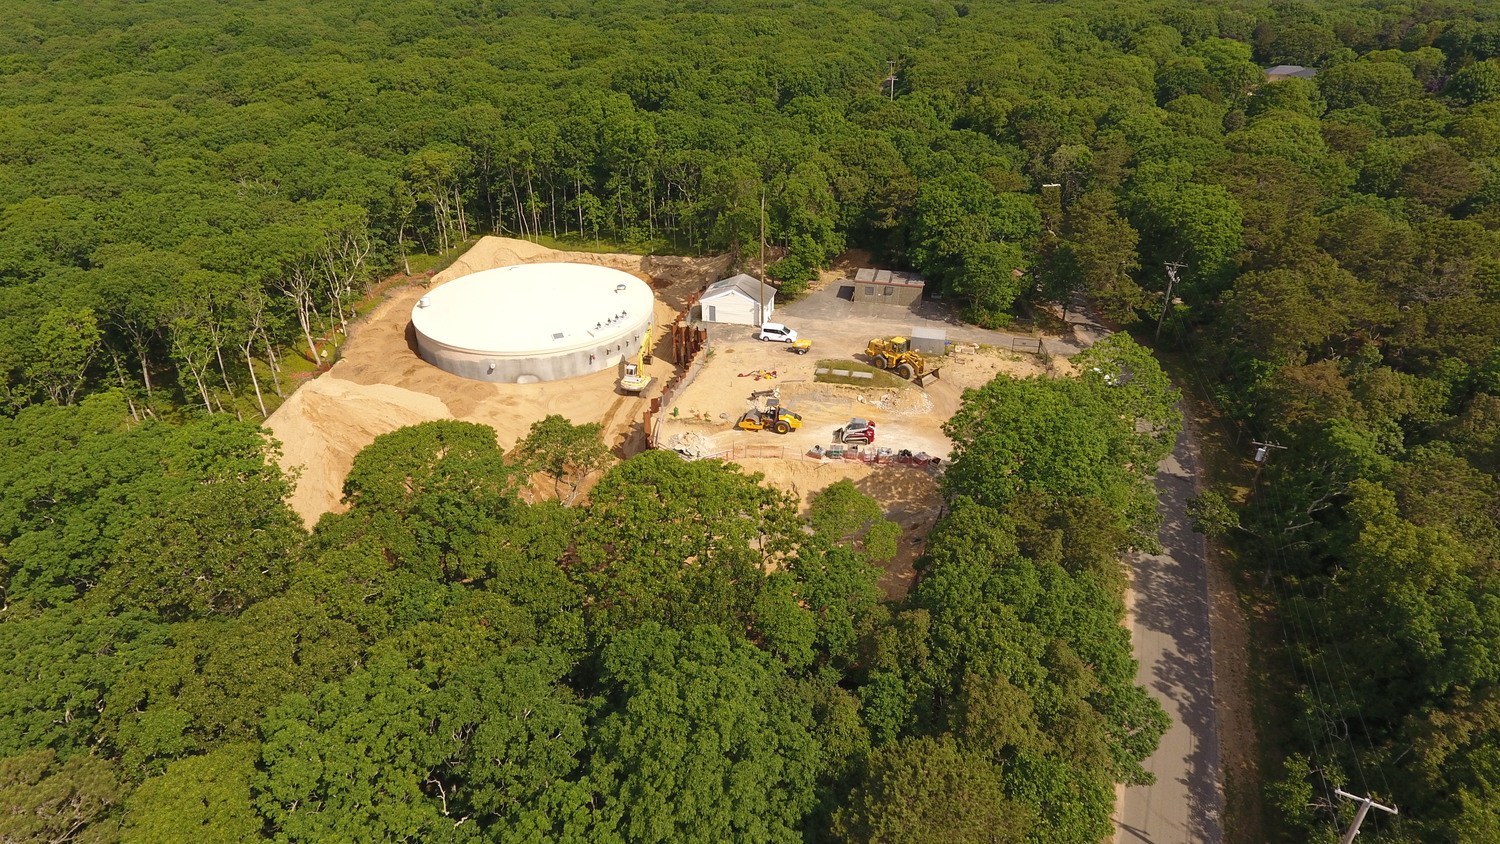 A 900,000 gallon water storage tank under construction in Amagansett in 2020. The tank was built to address weak water pressure in Amagansett and Montauk because of increasing demands on the pumping system that threatened the ability of fire hydrants to deliver sufficient water pressure for firefighters hoses. The 100-foot-wide, 20-foot-tall tank cost more than $3 million to build, a cost shared by all SCWA rate payers, even though the main catalyst for the tank's necessity was sprinkler and heating systems at Hamptons' estates. 
MICHAEL WRIGHT